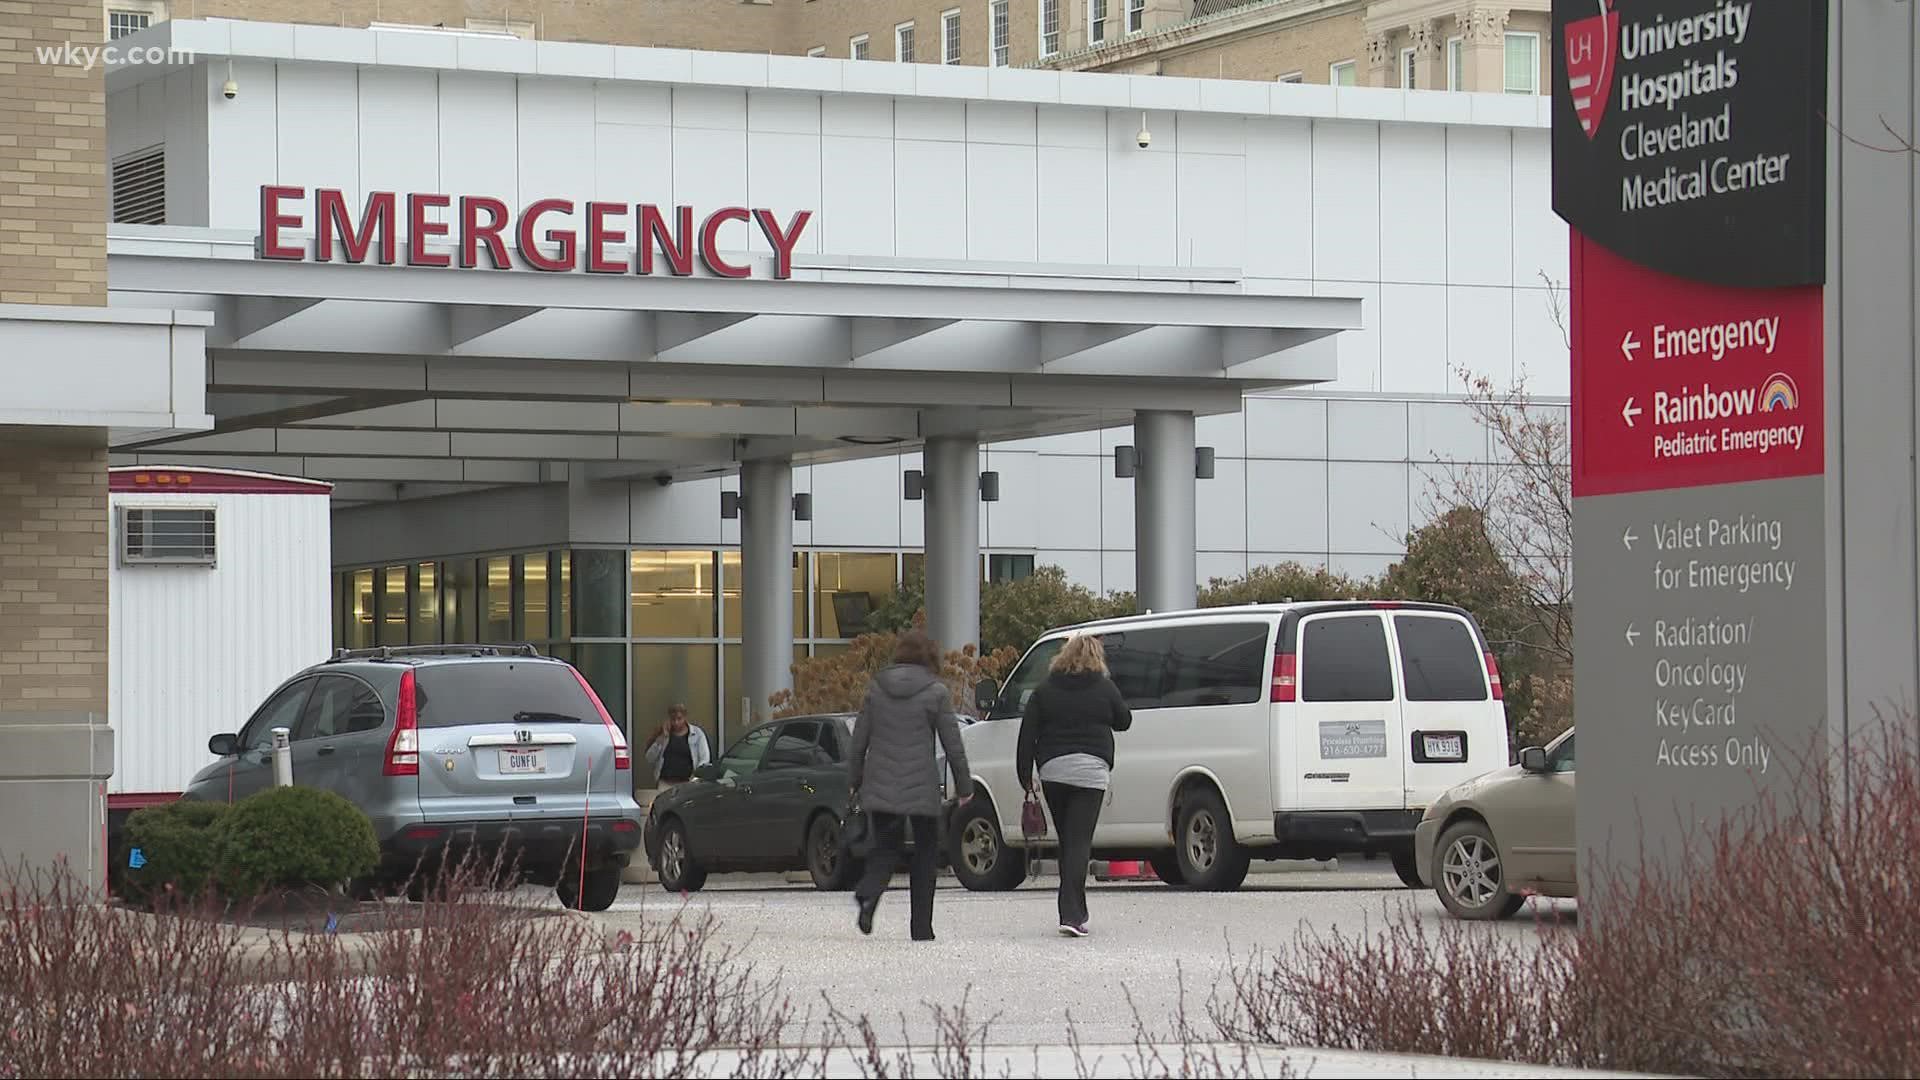 One local doctor told 3News that she has seen an uptick in children being hospitalized for COVID-19 related issues, especially among the unvaccinated.